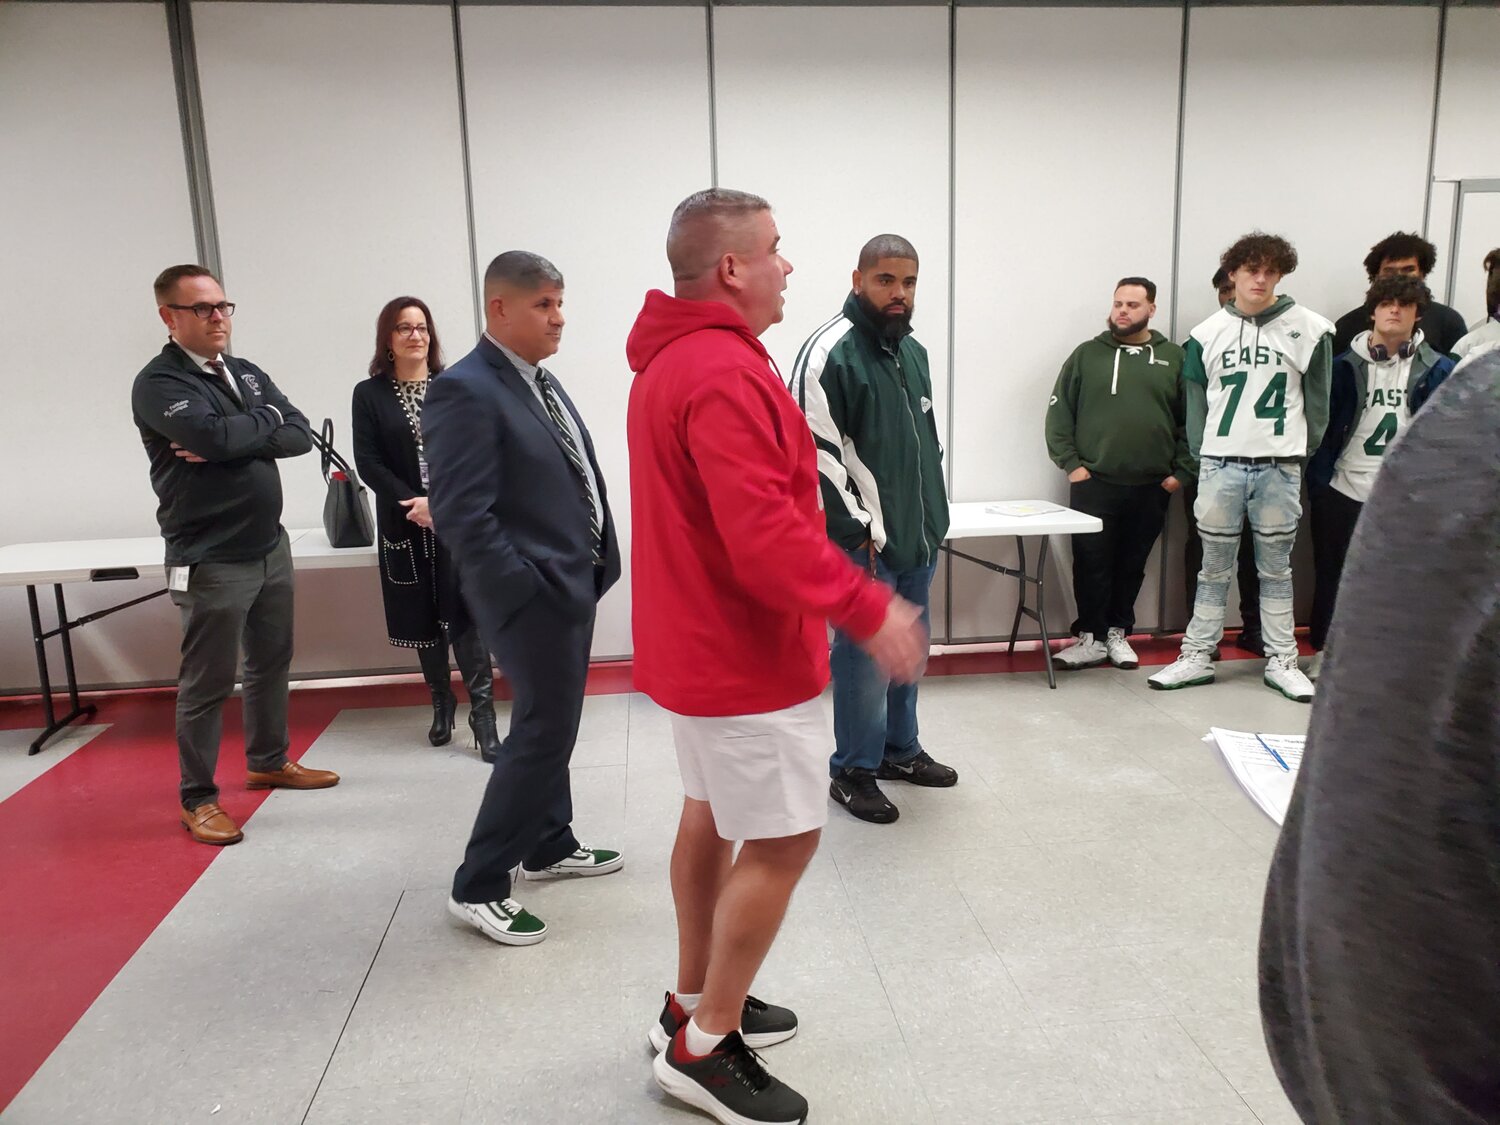 A COACH’S WISDOM: coaches Milewski (red) and McDaniel (green) speak with their players before sending them out to make their deliveries.